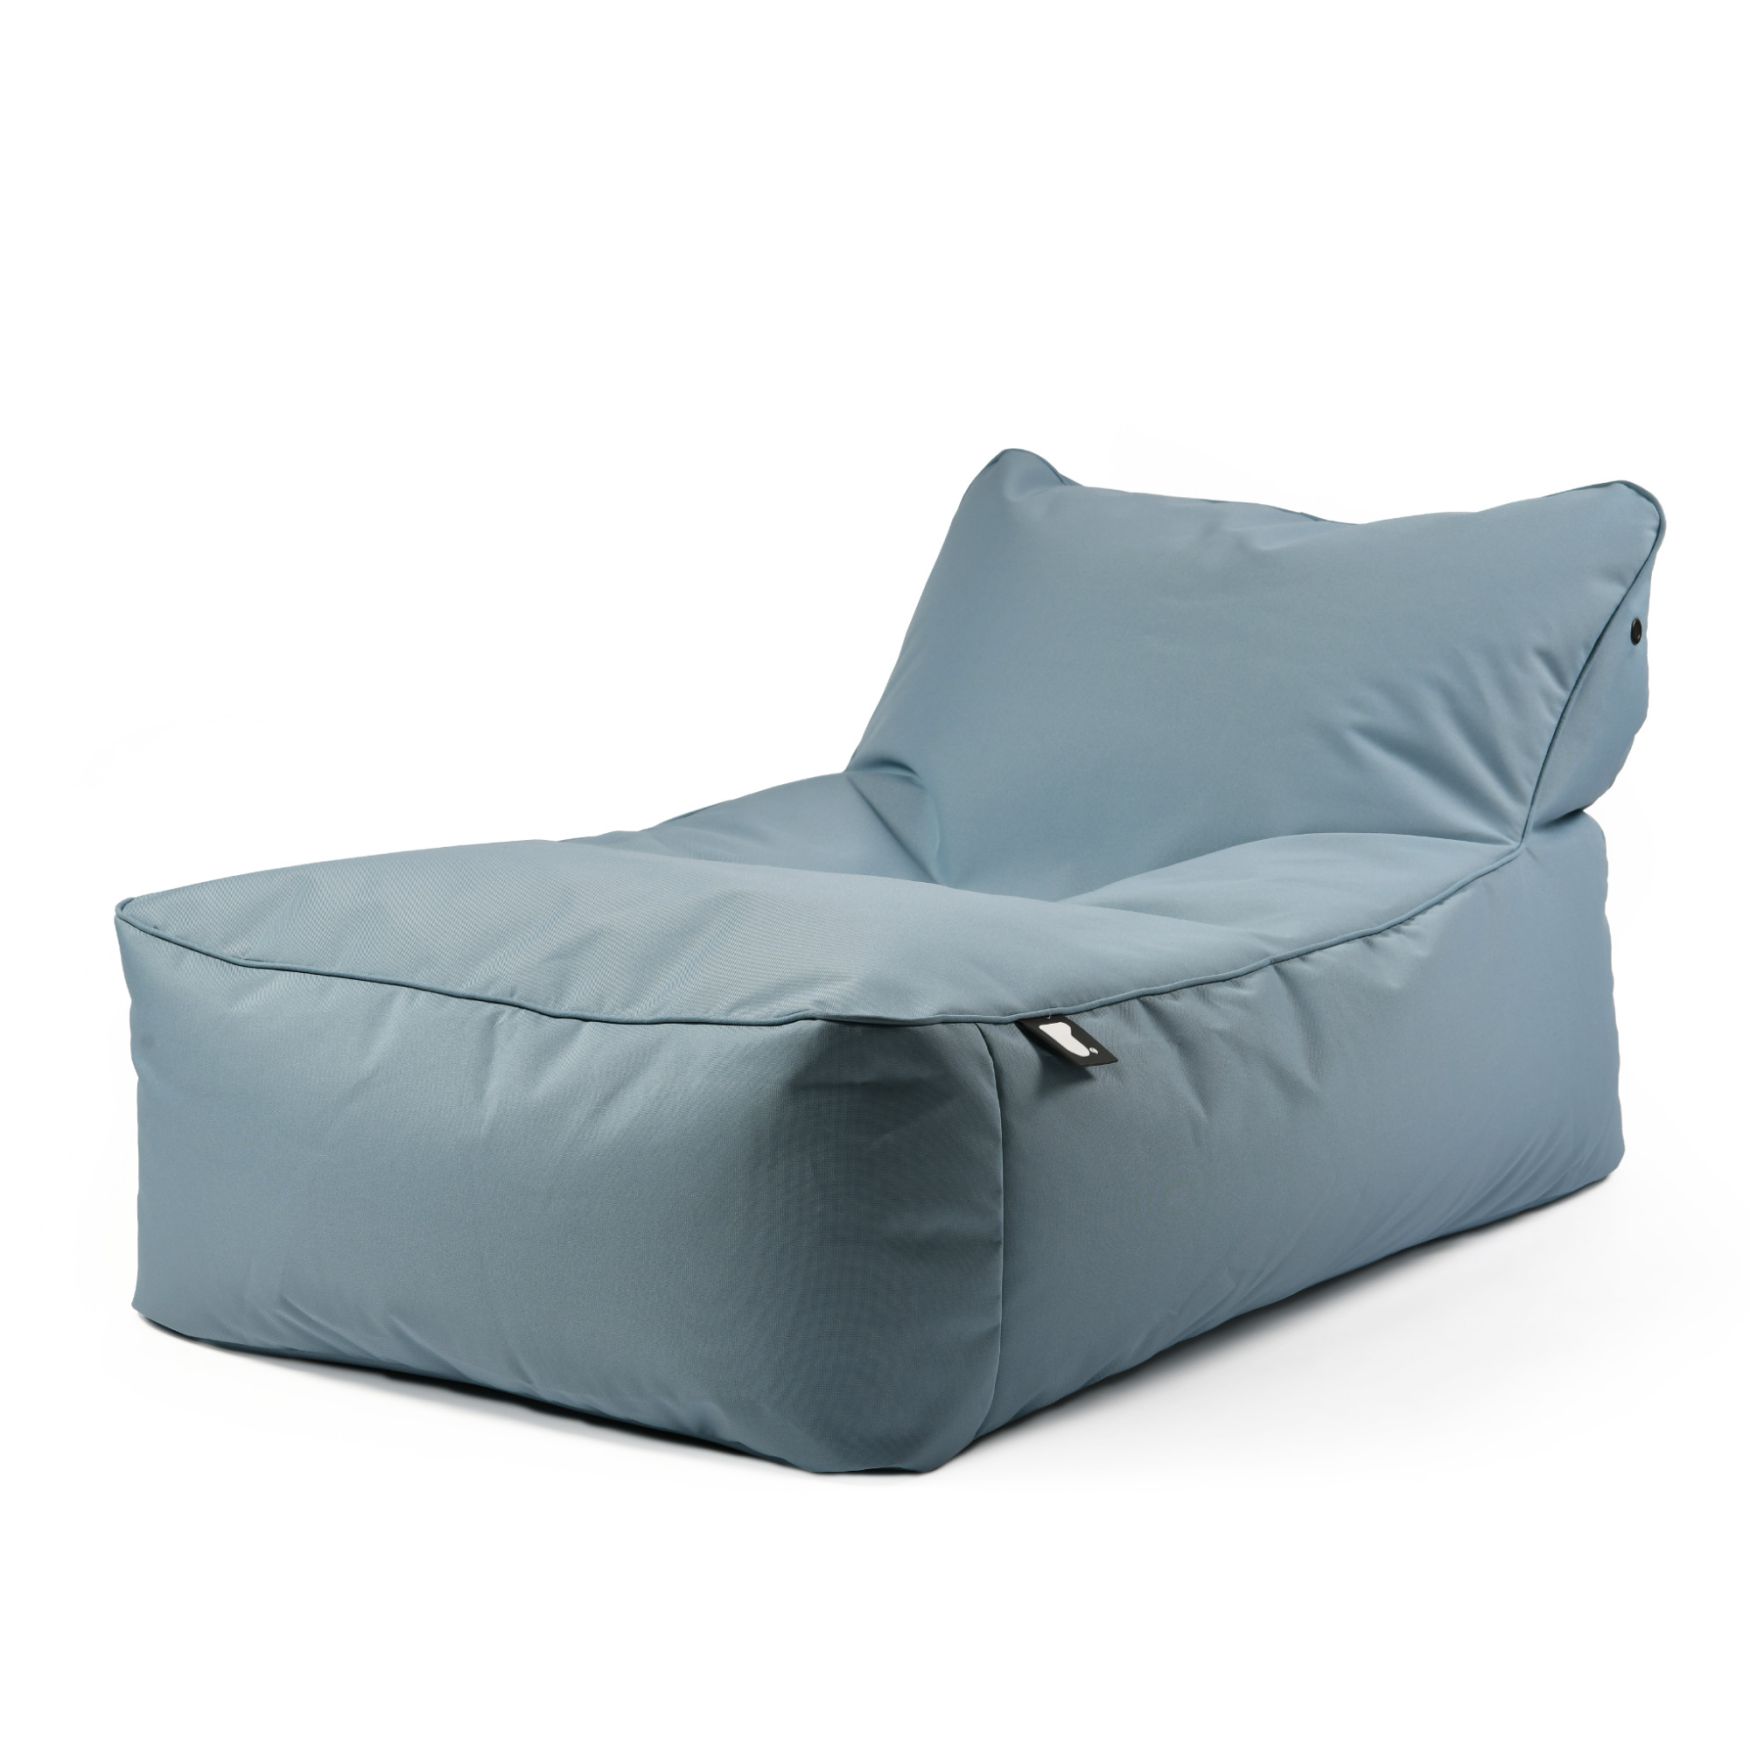 extreme lounging bbed lounger loungebed outdoor sea blue